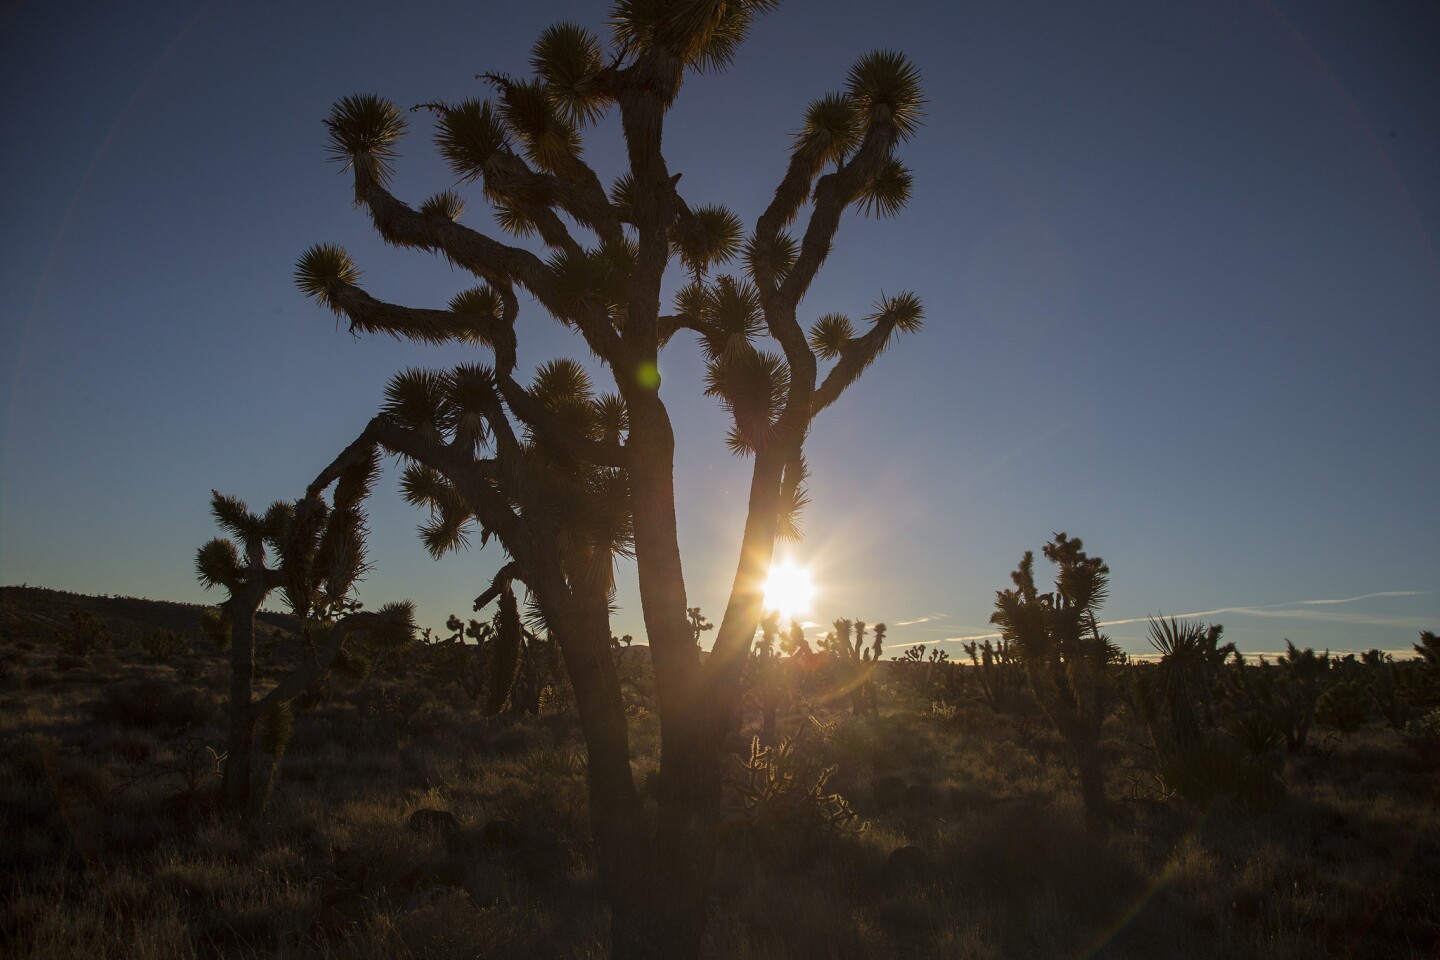 A Joshua tree is backlighted by the setting sun in the Mojave Desert. Concern over the long-term health of the deceptively delicate terrain spurred President Obama to designate the Mojave Trails, Sand to Snow and Castle Mountains monuments under the 1906 Antiquities Act.